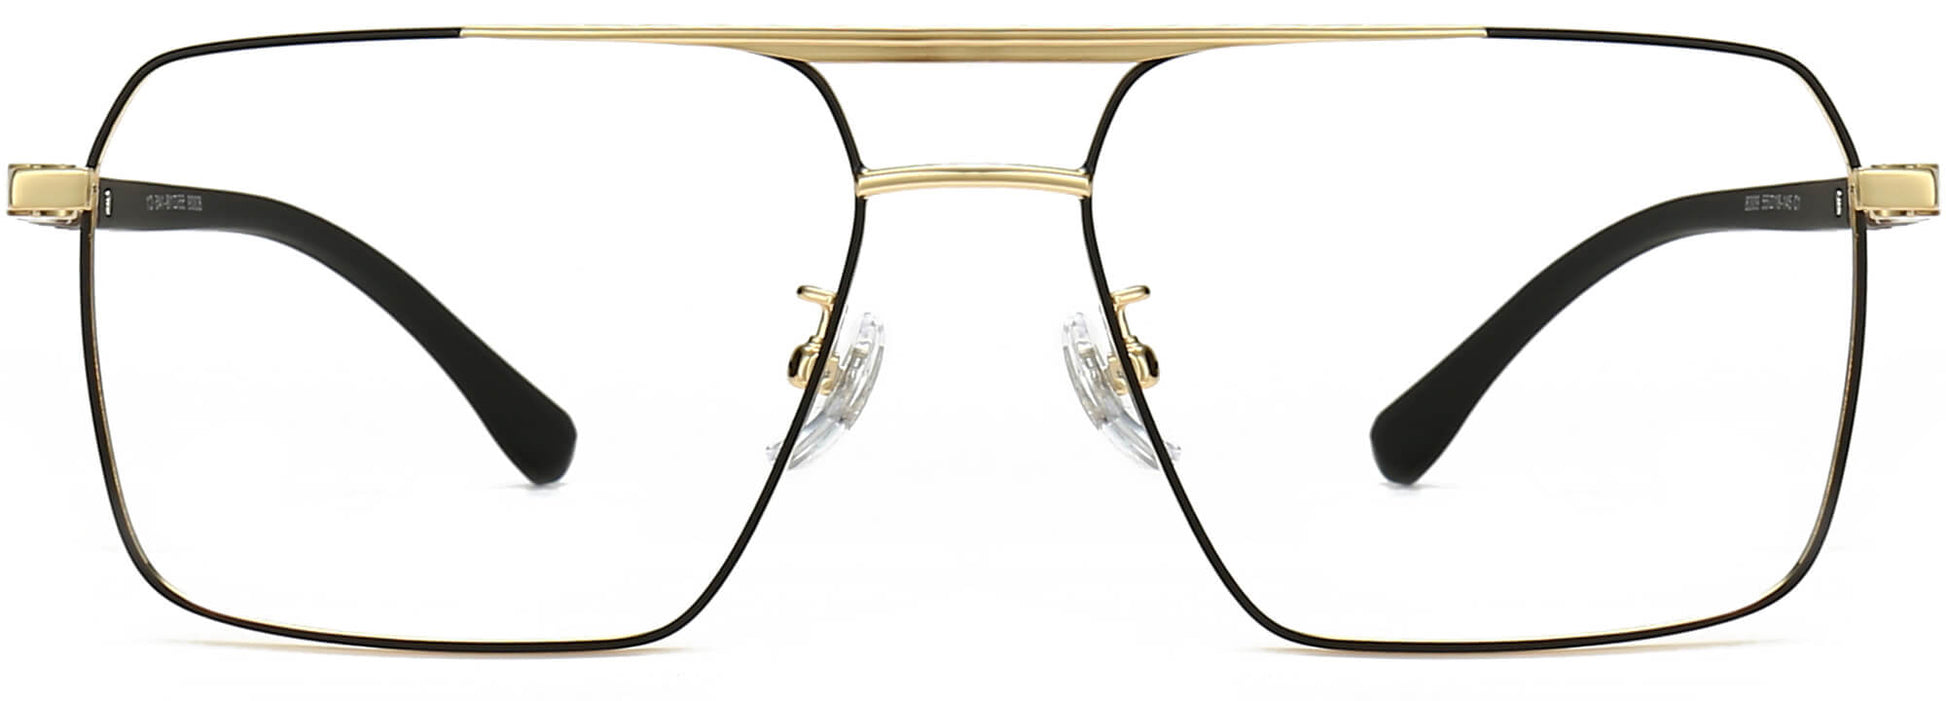 Hamza Square Black Eyeglasses from ANRRI, front view